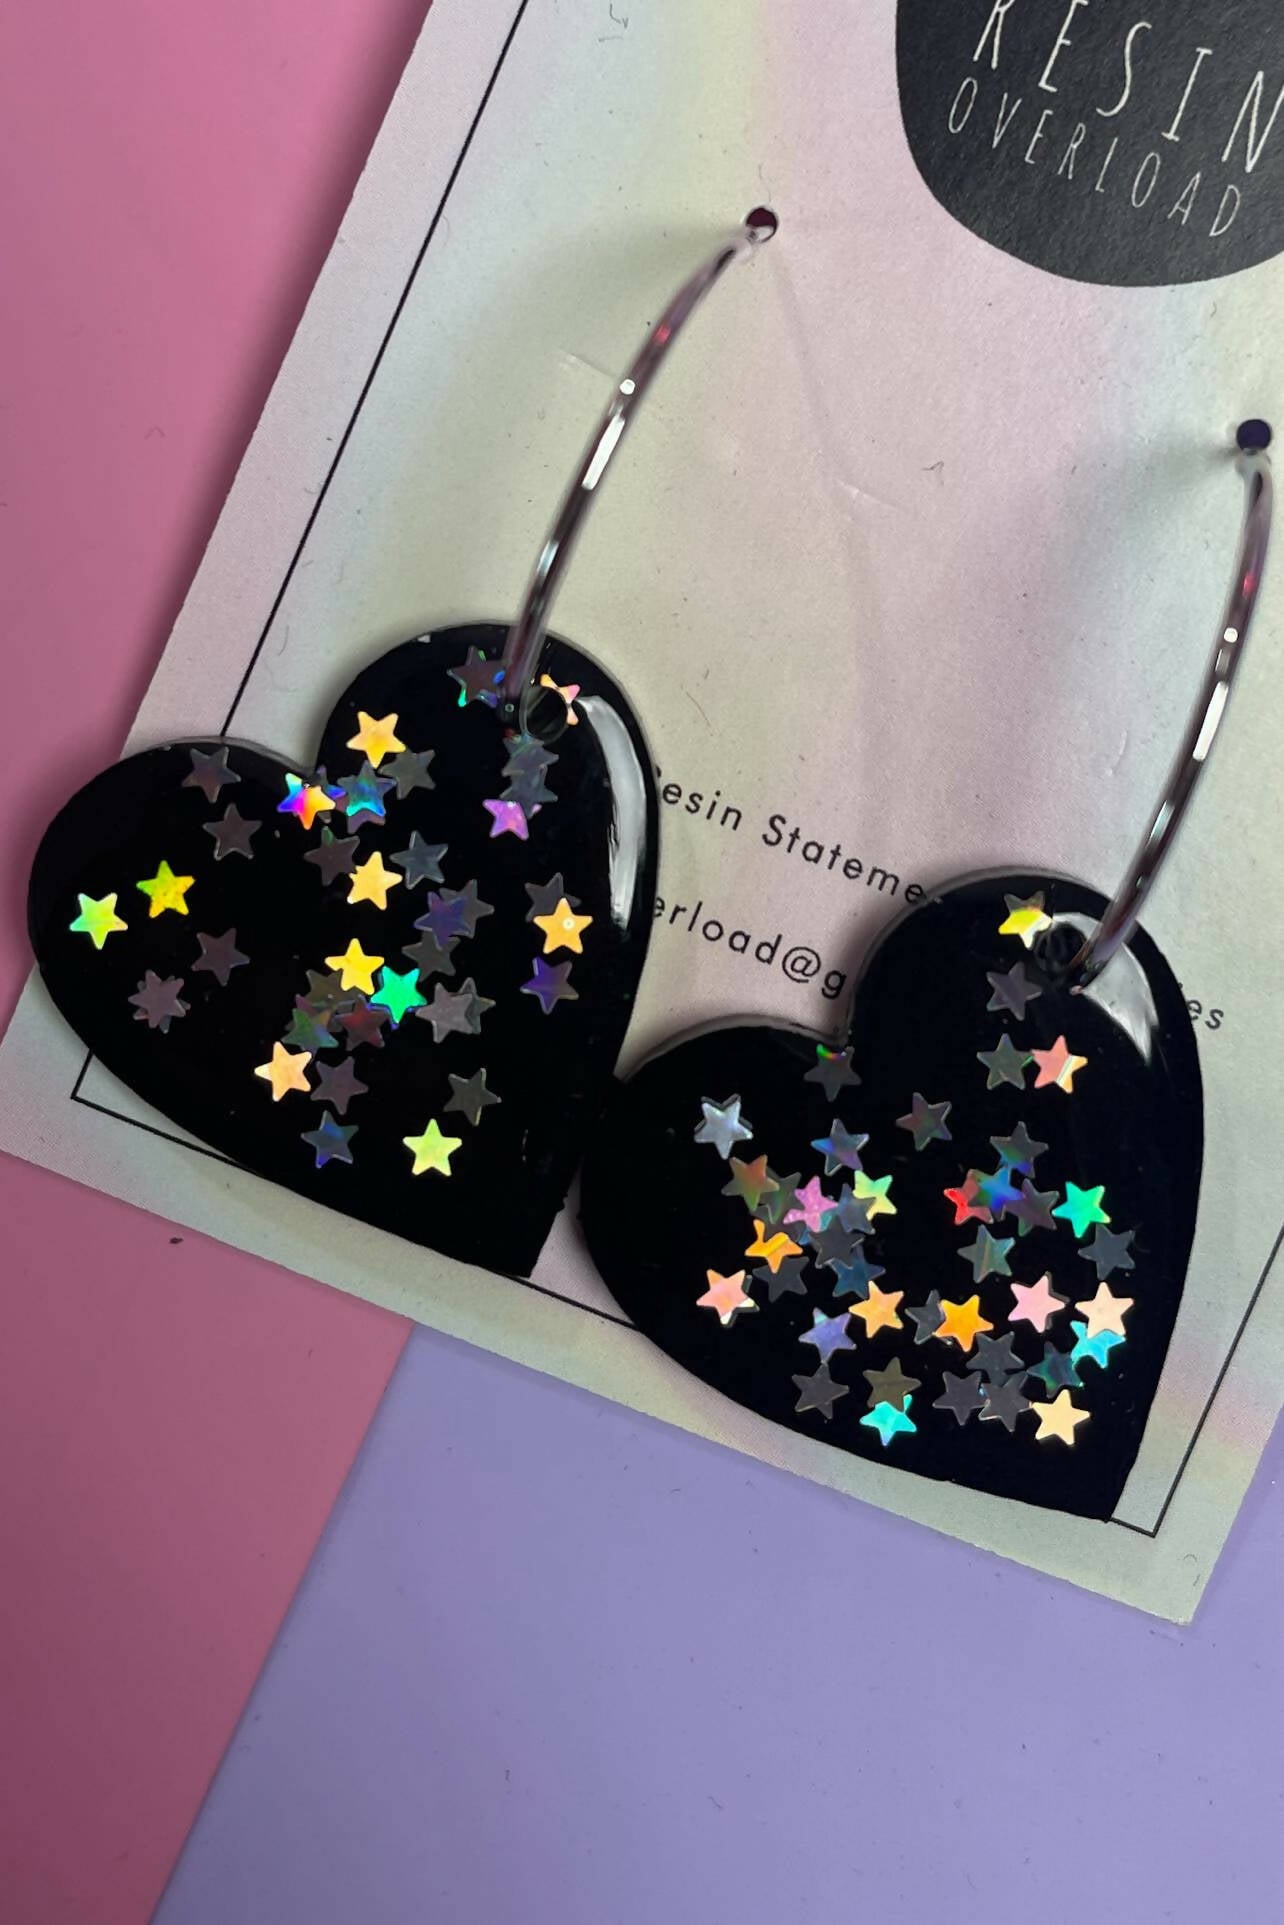 Resin Heart Shaped Earrings Glittery Resin Earrings Festival Earrings Cute Earrings Sparkly Earrings Holographic Stars Bewitched Halloween